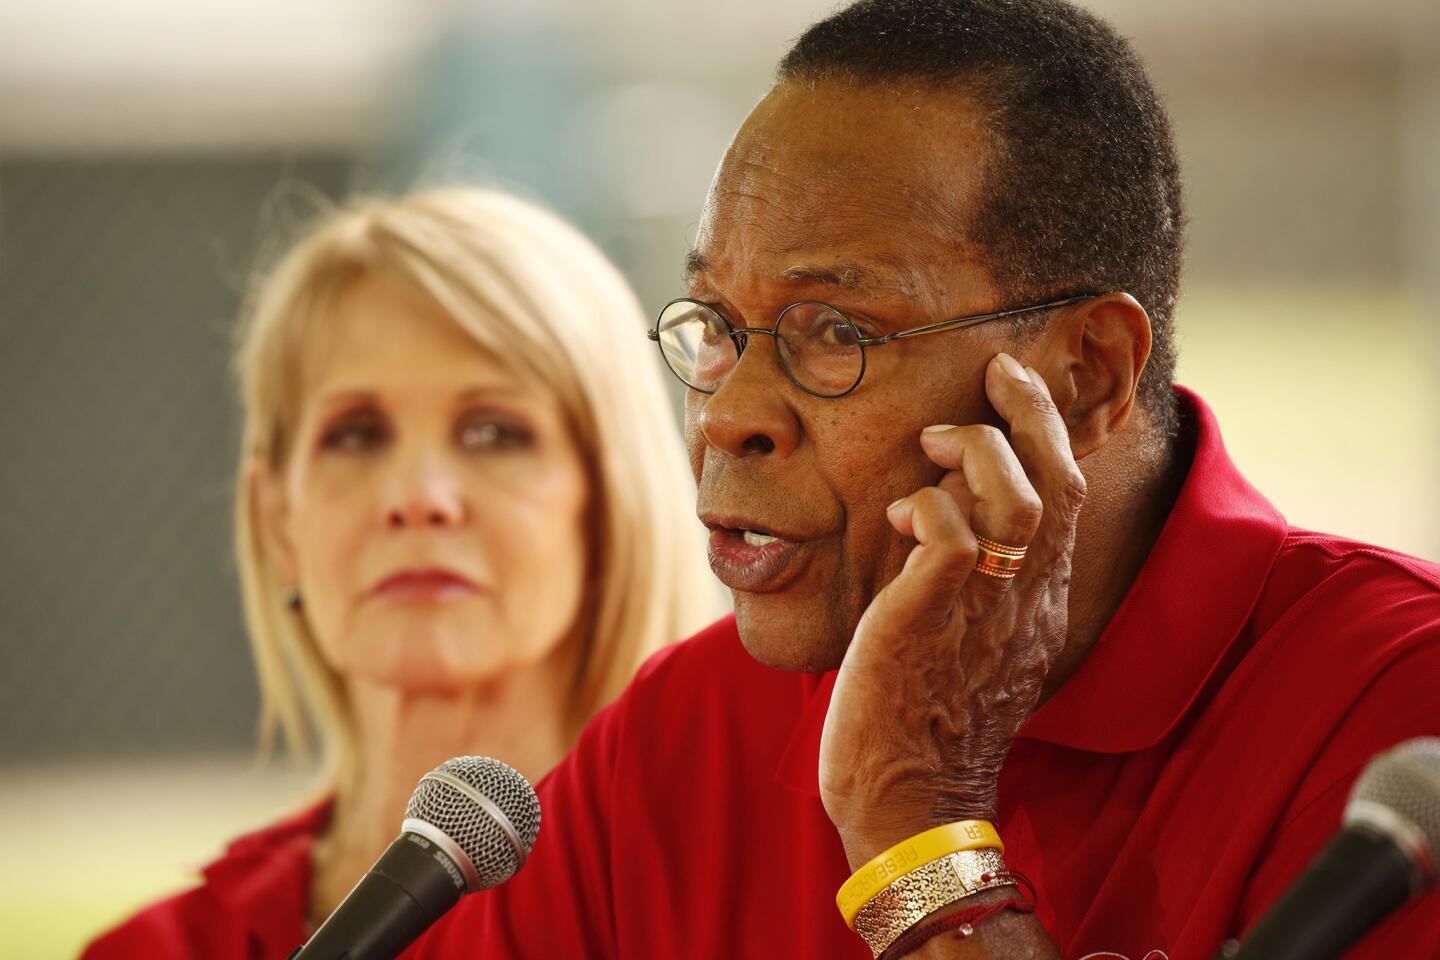 Baseball great rod carew owes his life to NFL player's transplanted organs